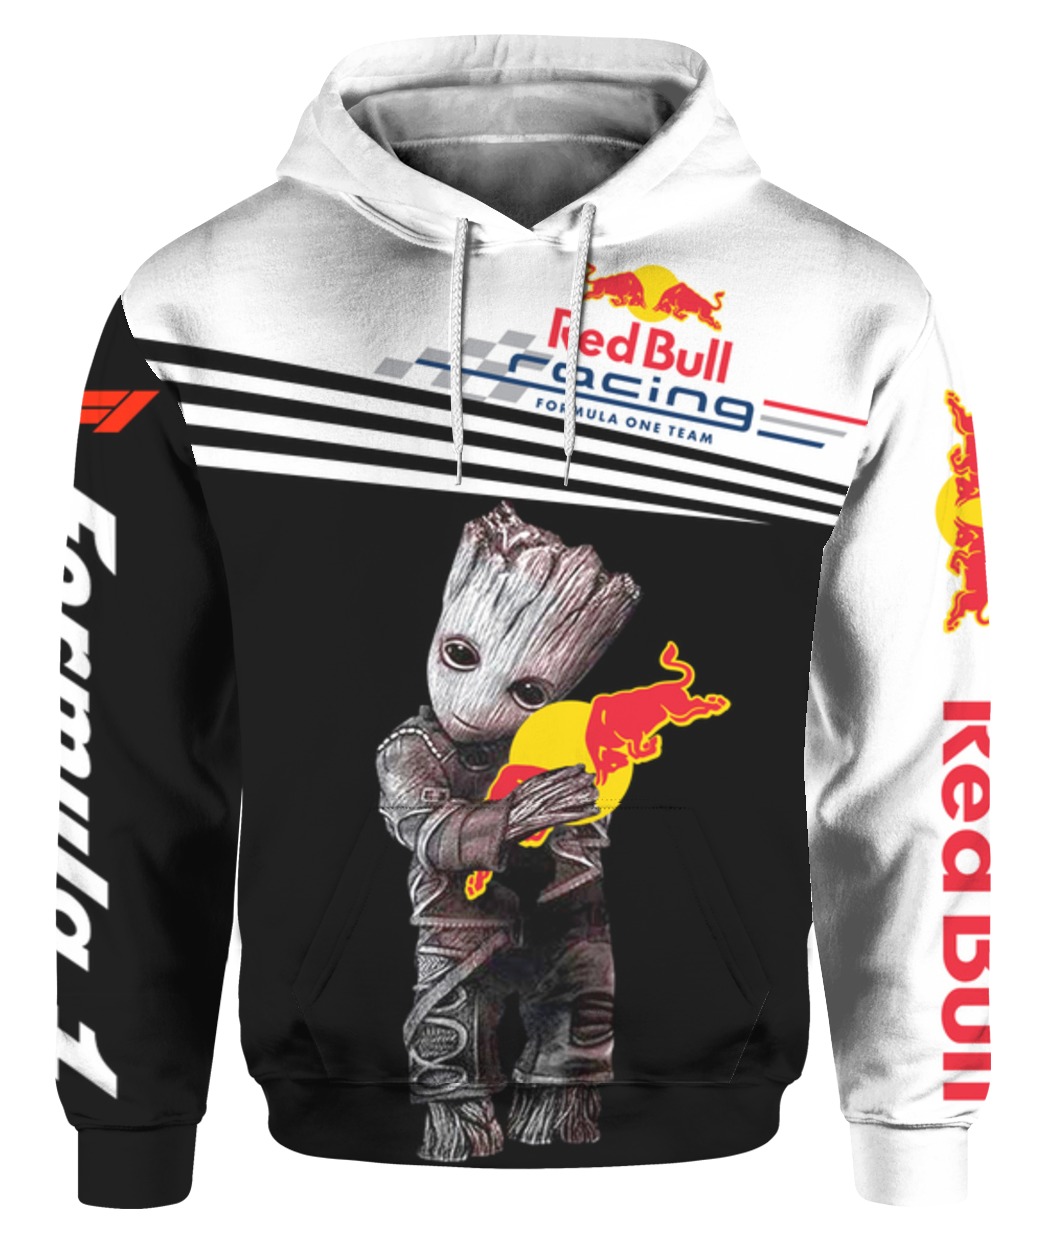 Groot hold redbull racing all over print hoodie 1